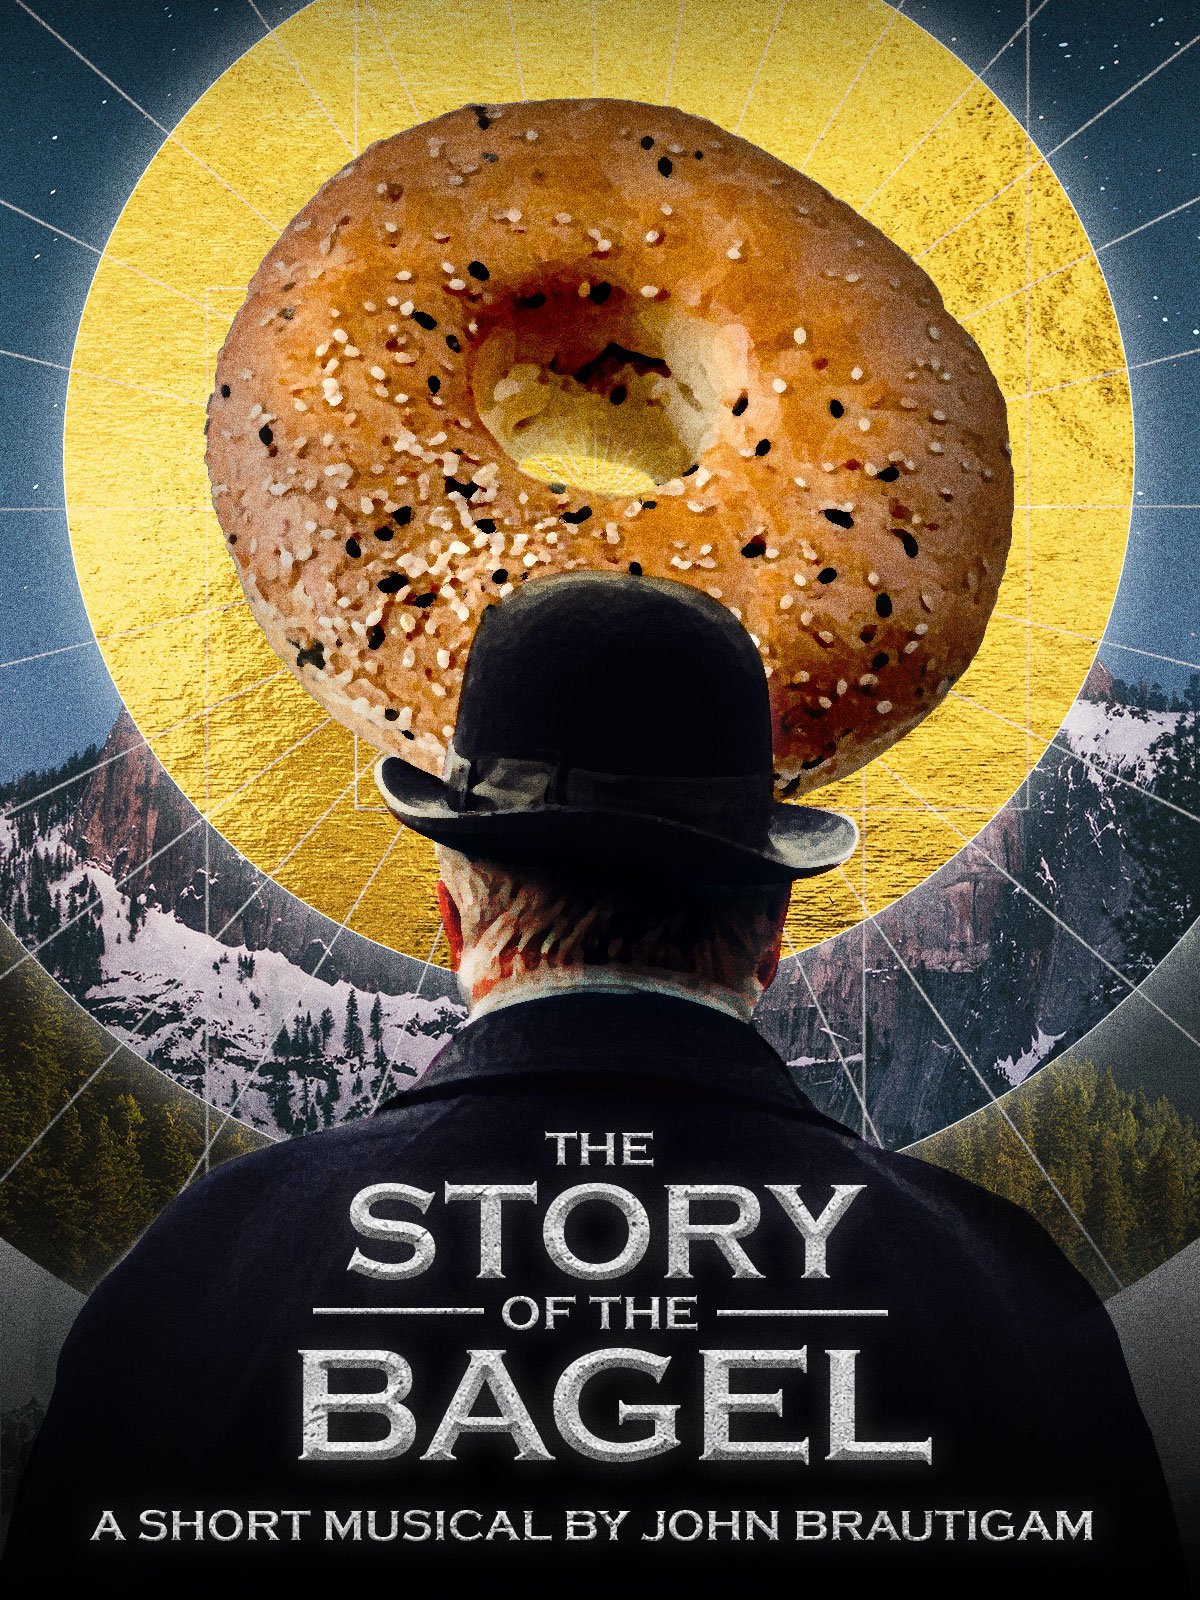 The Story of the Bagel